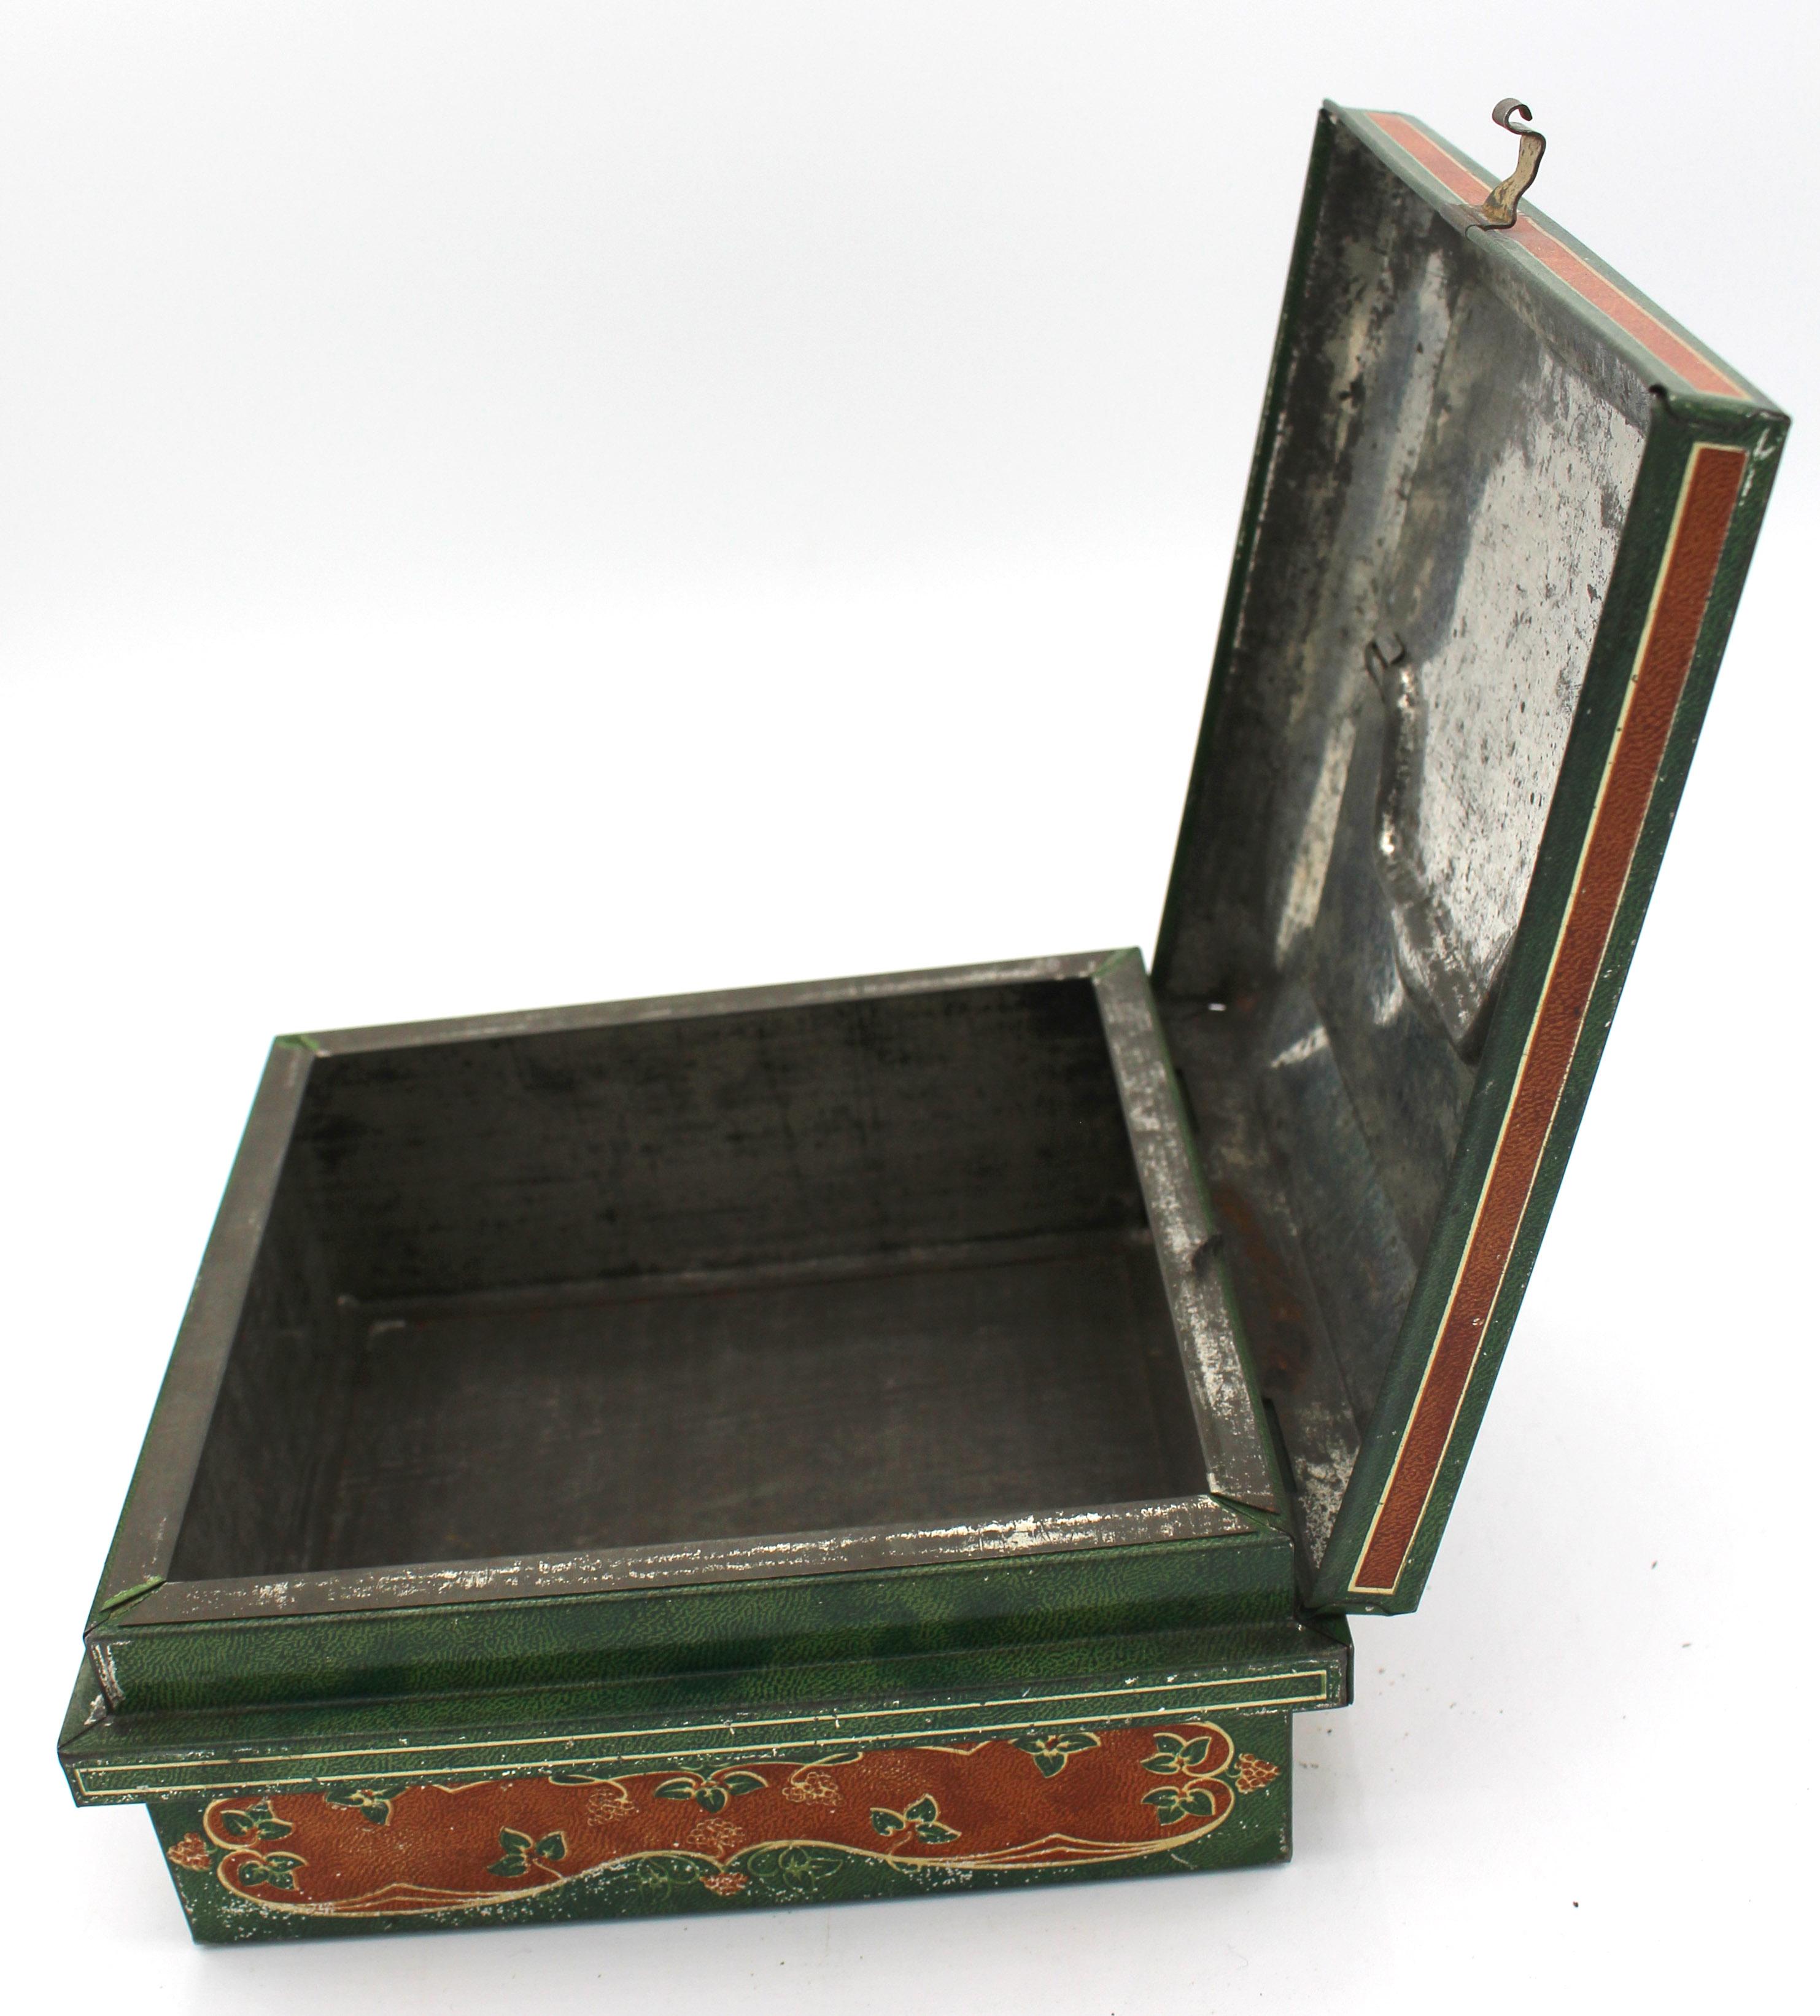 1903 Huntley & Palmers Jewelry Casket Form Biscuit Tin Box For Sale 1